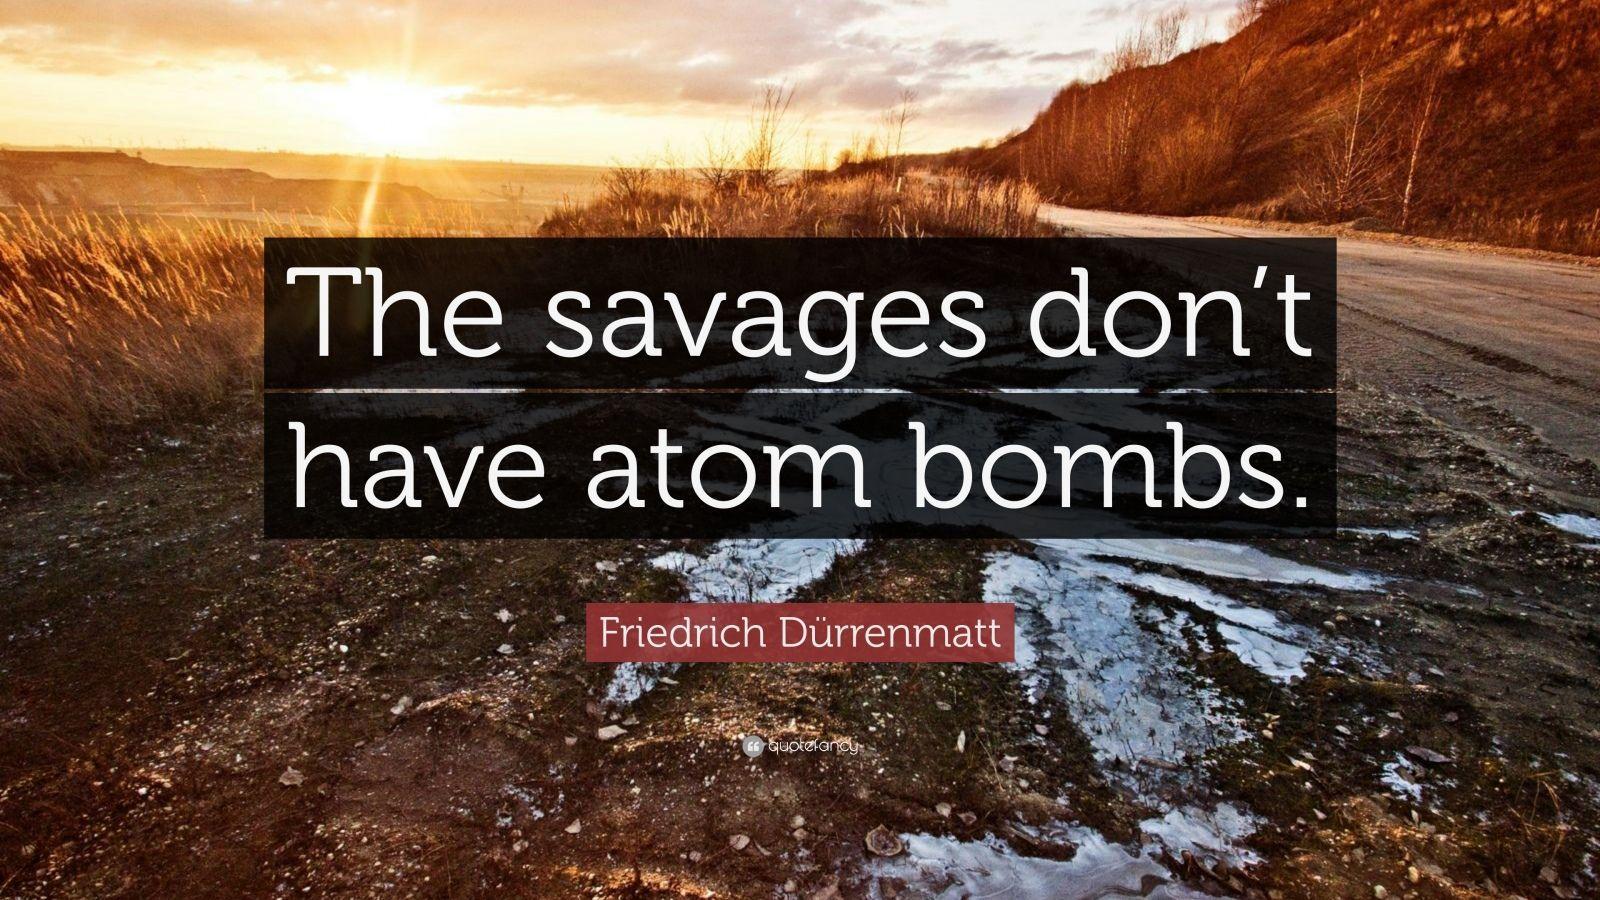 Friedrich Dürrenmatt Quote: “The savages don't have atom bombs.” 7